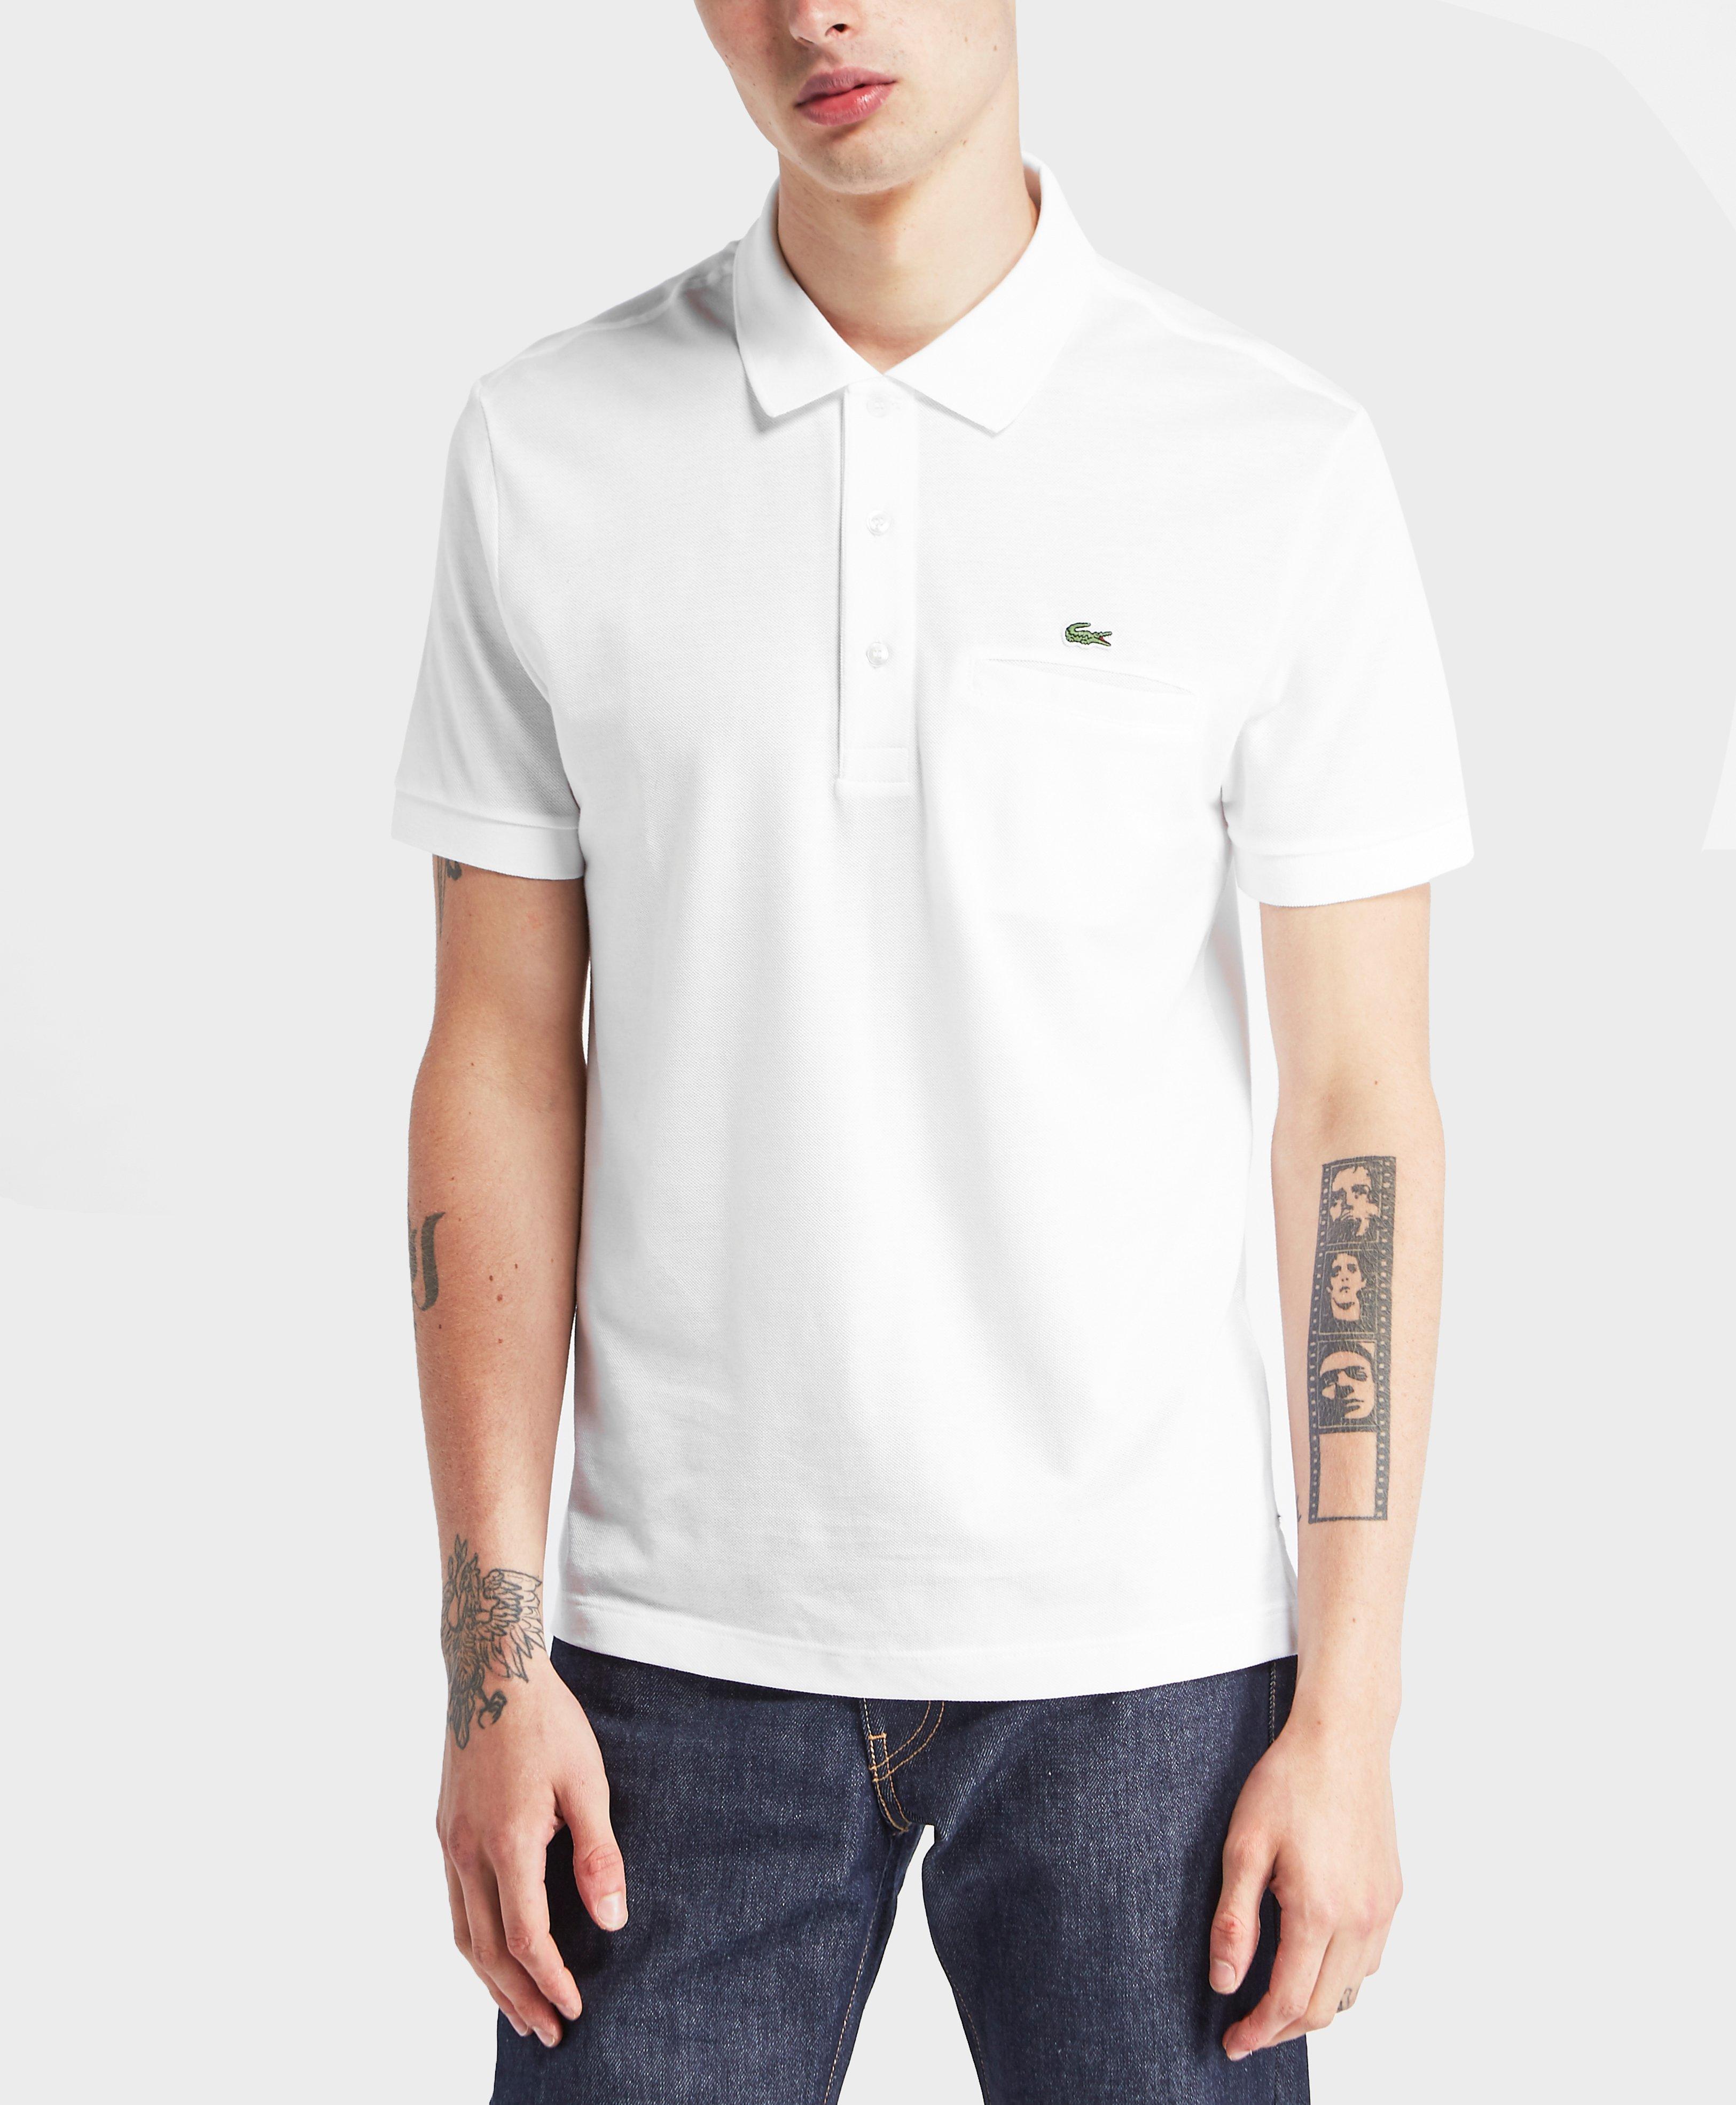 Lacoste Cotton Pocket Polo Shirt in White for Men - Lyst